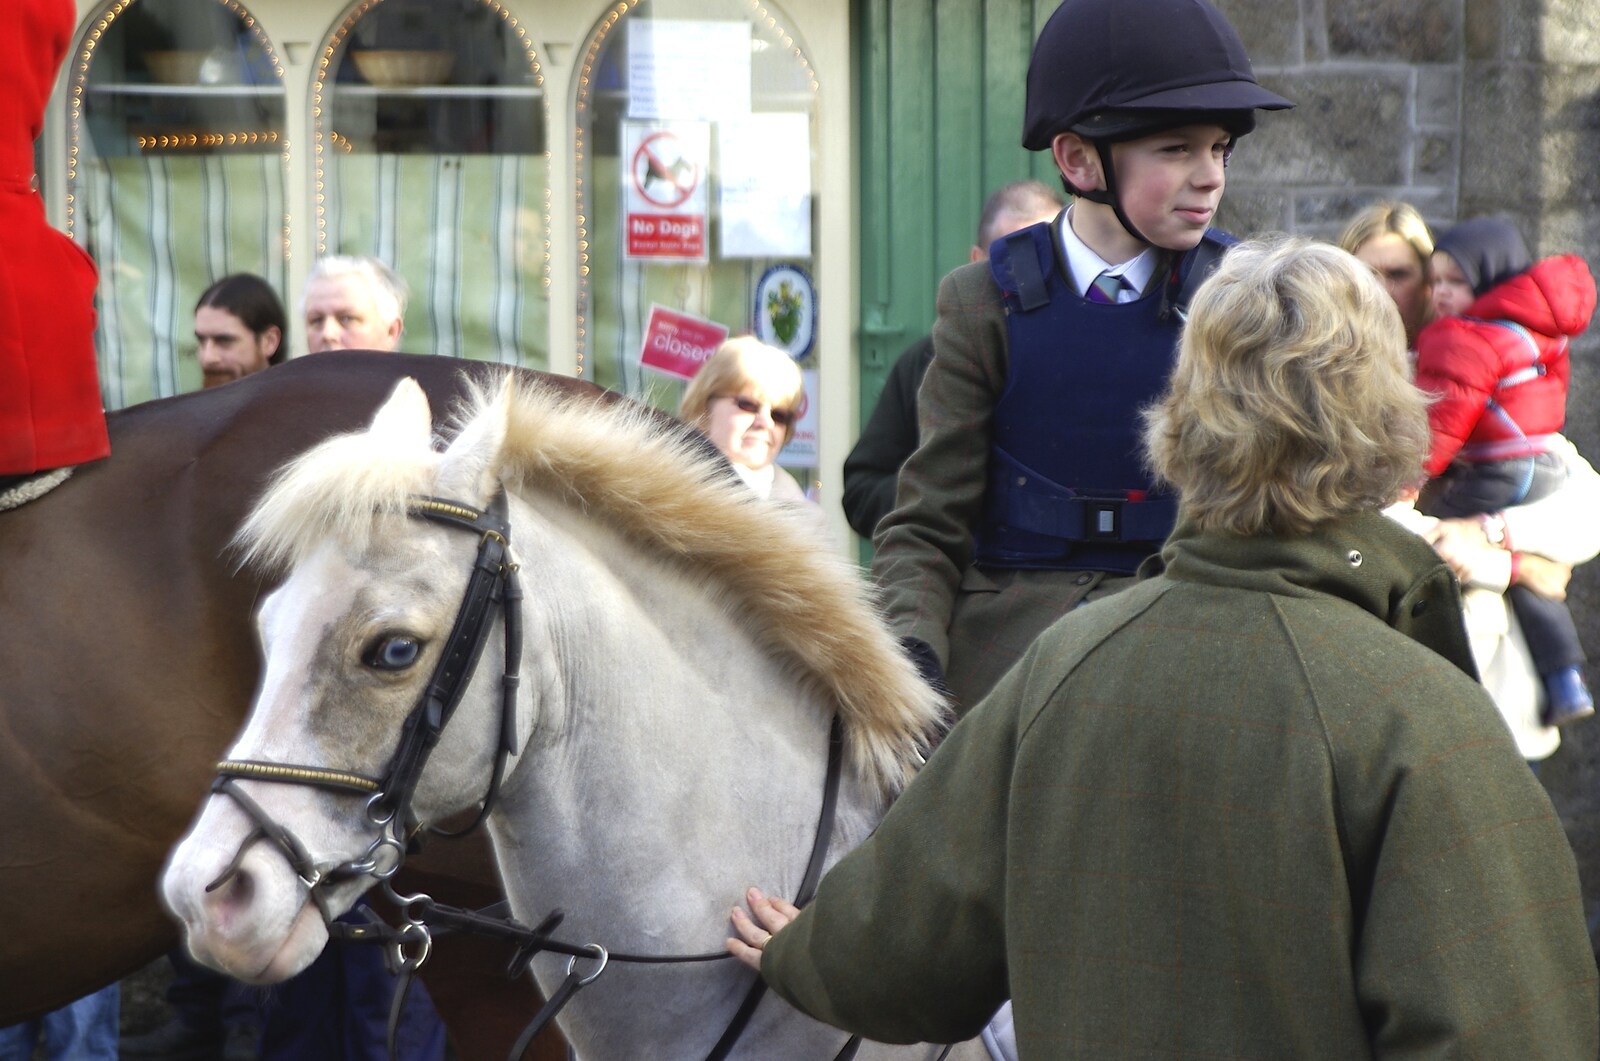 A small boy on a crazy-eyed pony from A Boxing Day Hunt, Chagford, Devon - 26th December 2007